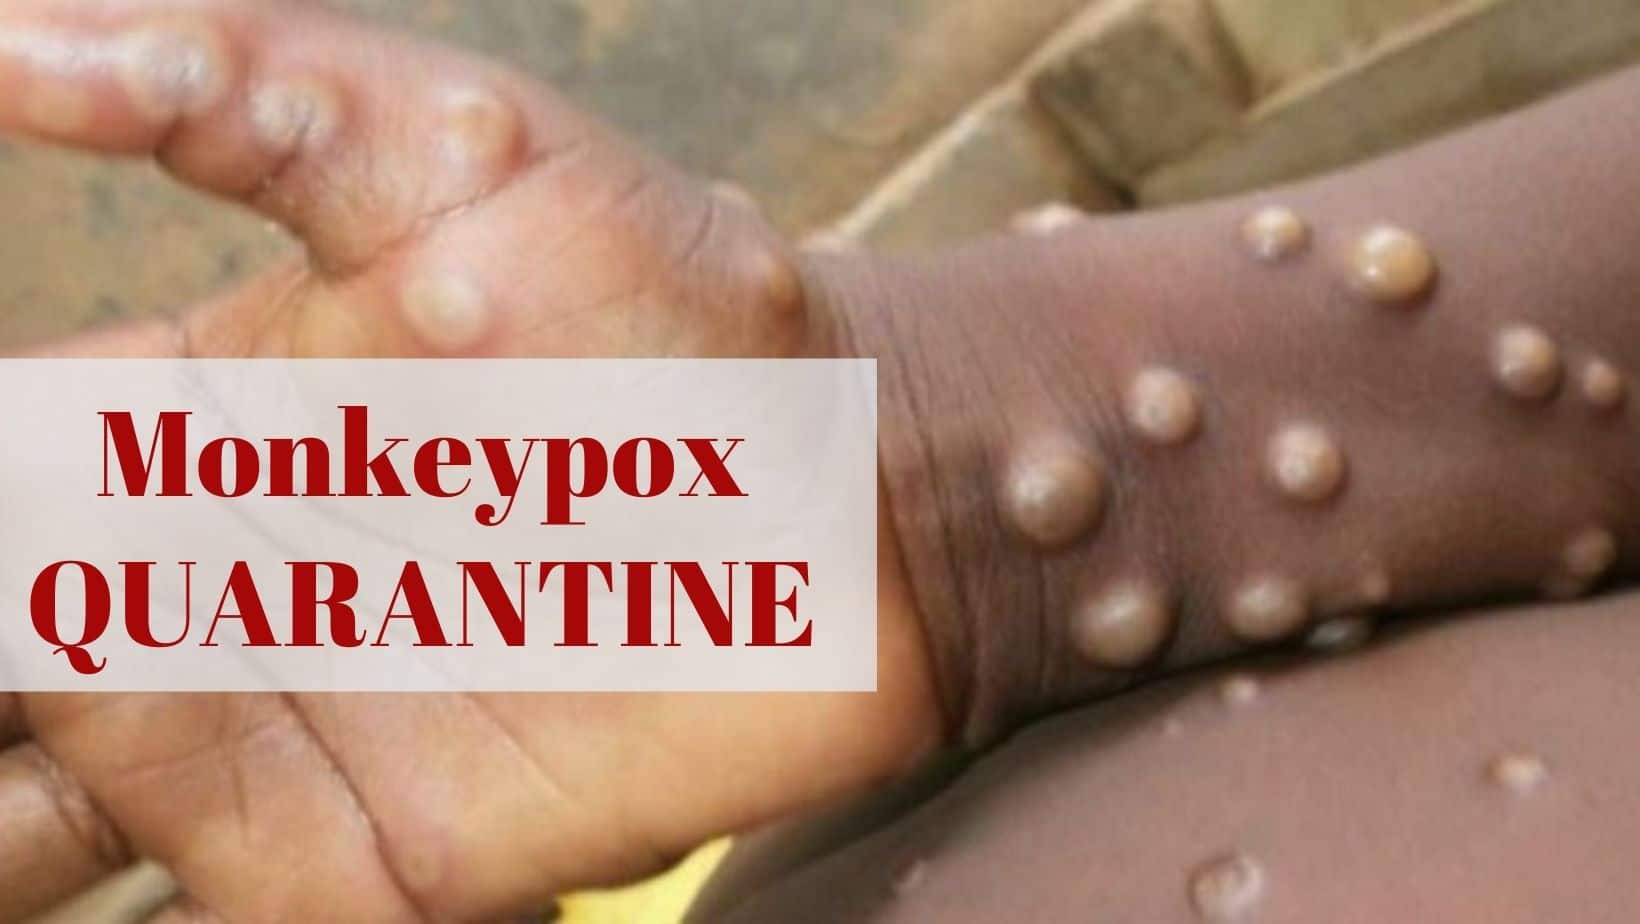 Belgium Becomes First Country To Introduce Monkeypox Quarantine Compulsory As Virus Spread To 12 Countries